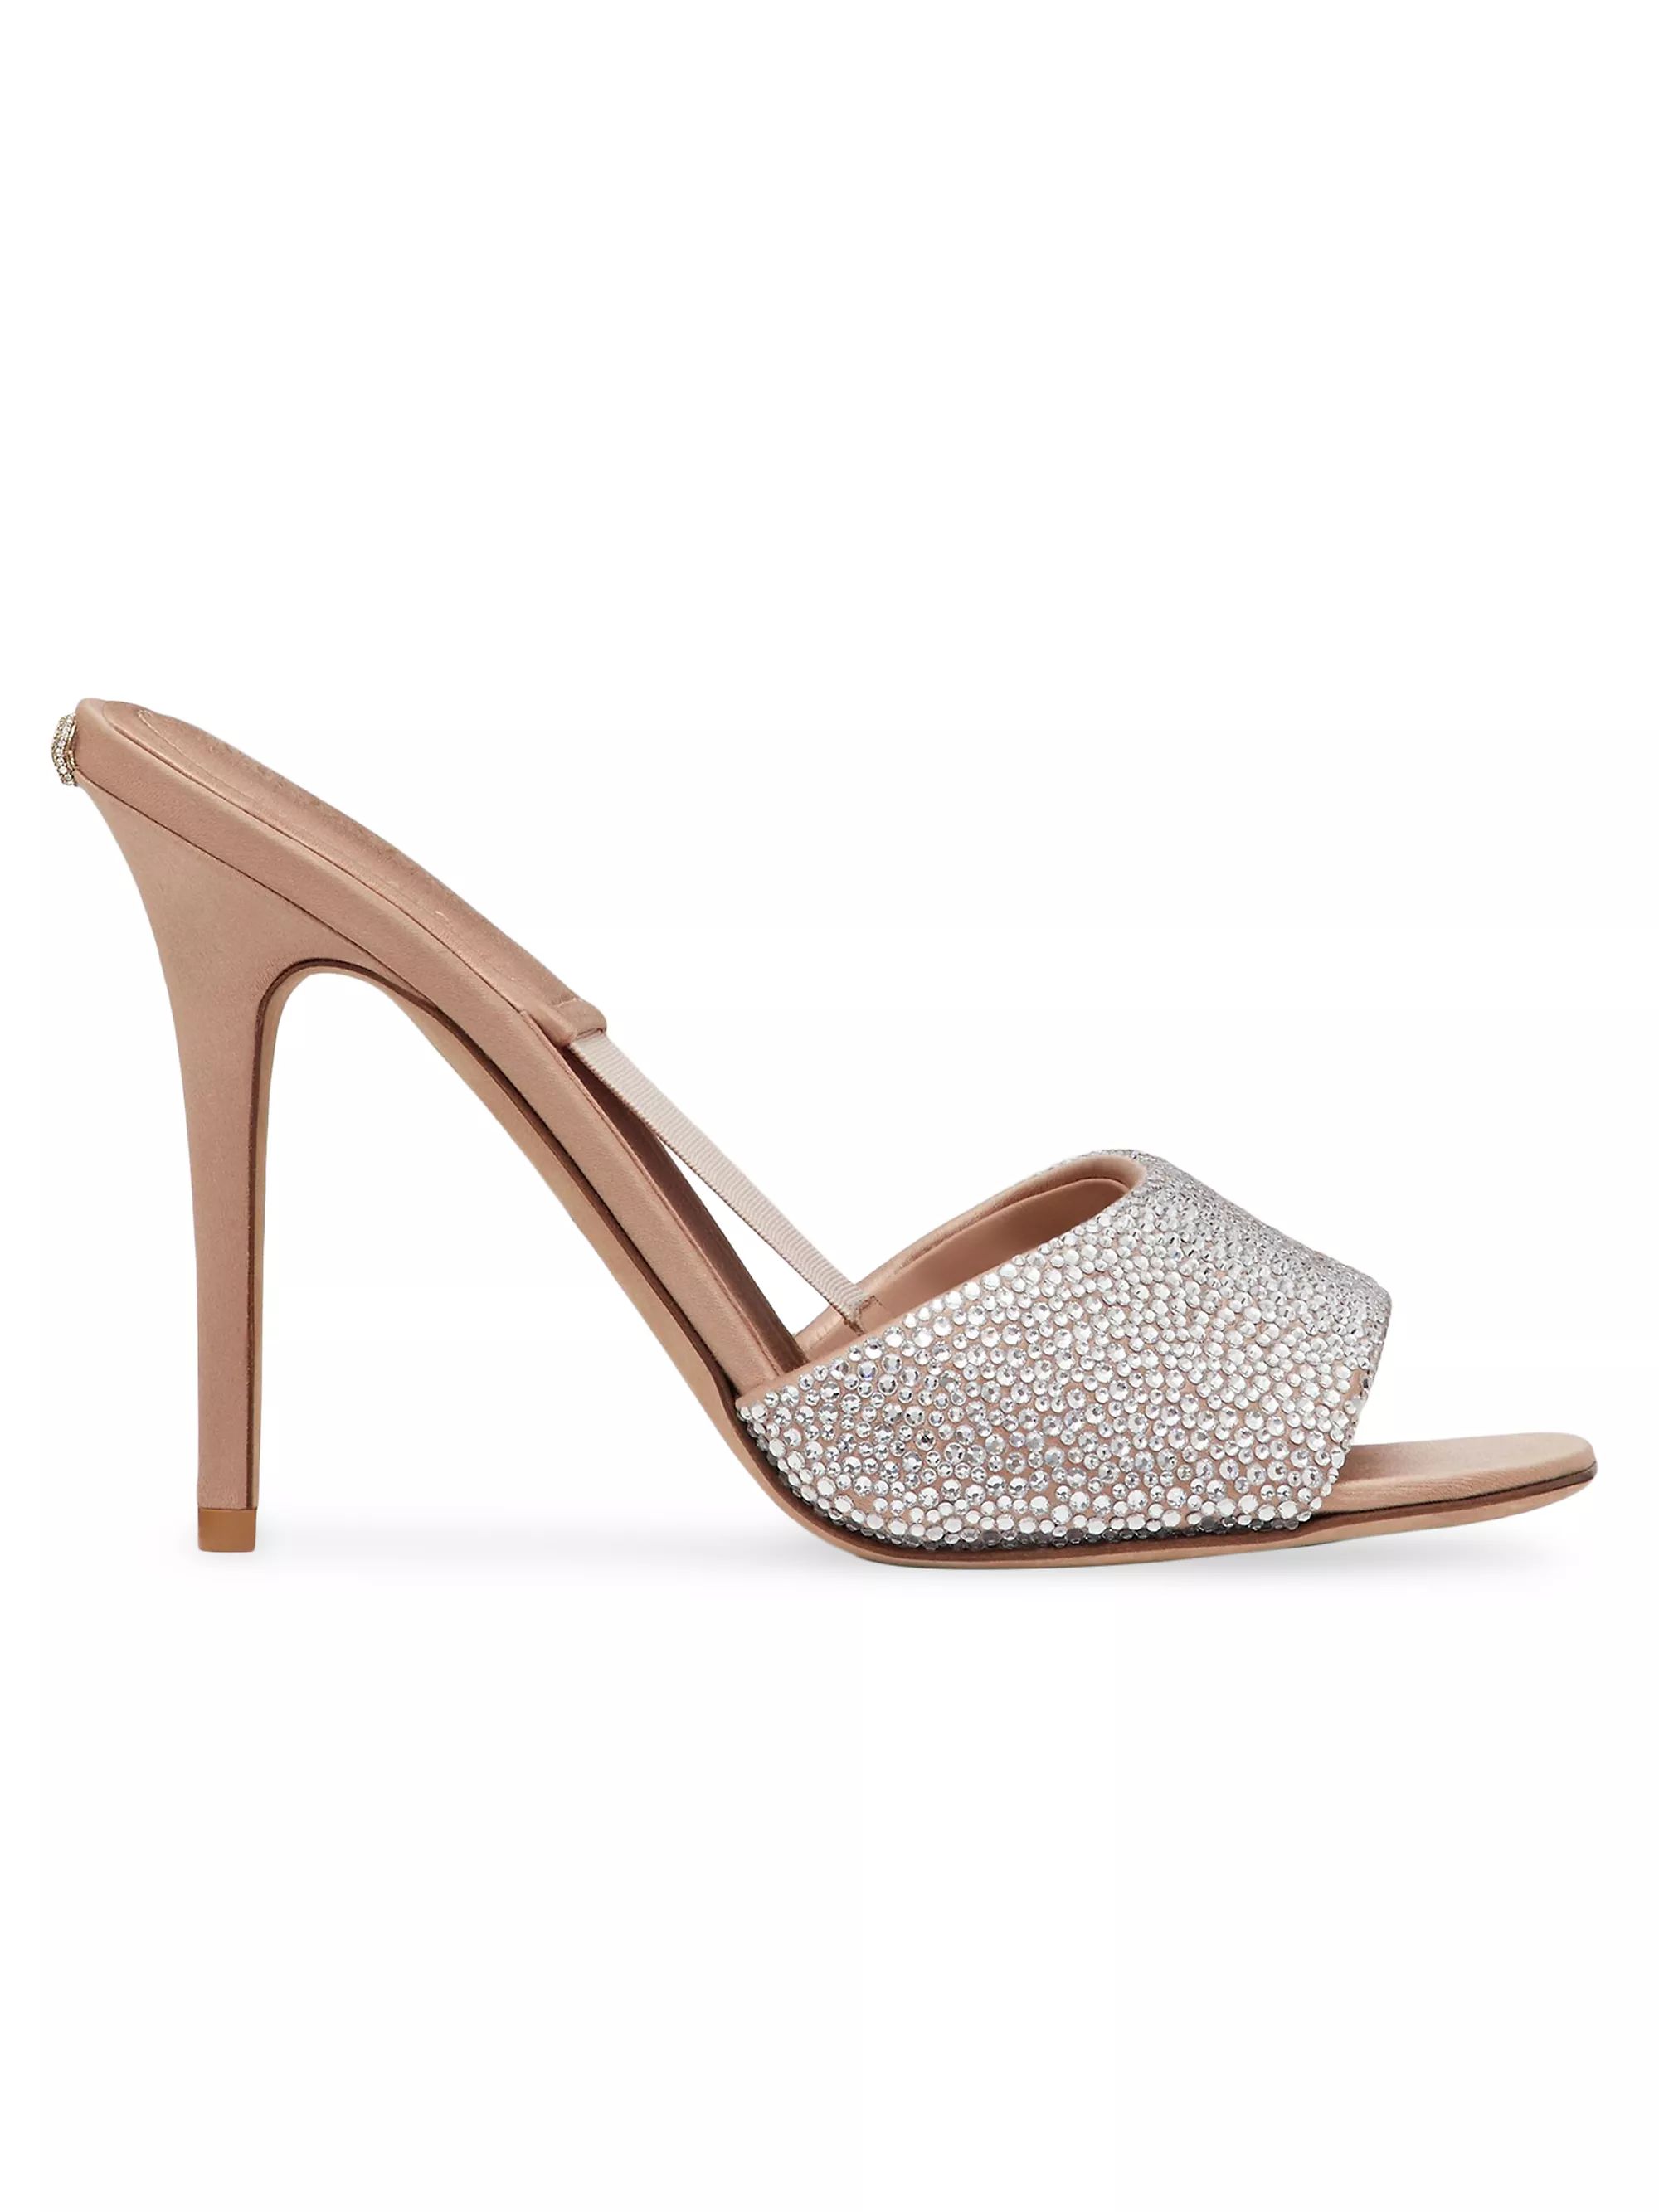 Rose CannelleAll HeelsValentino GaravaniNite-Out Slide Sandals With Crystals$840$1,400
          ... | Saks Fifth Avenue